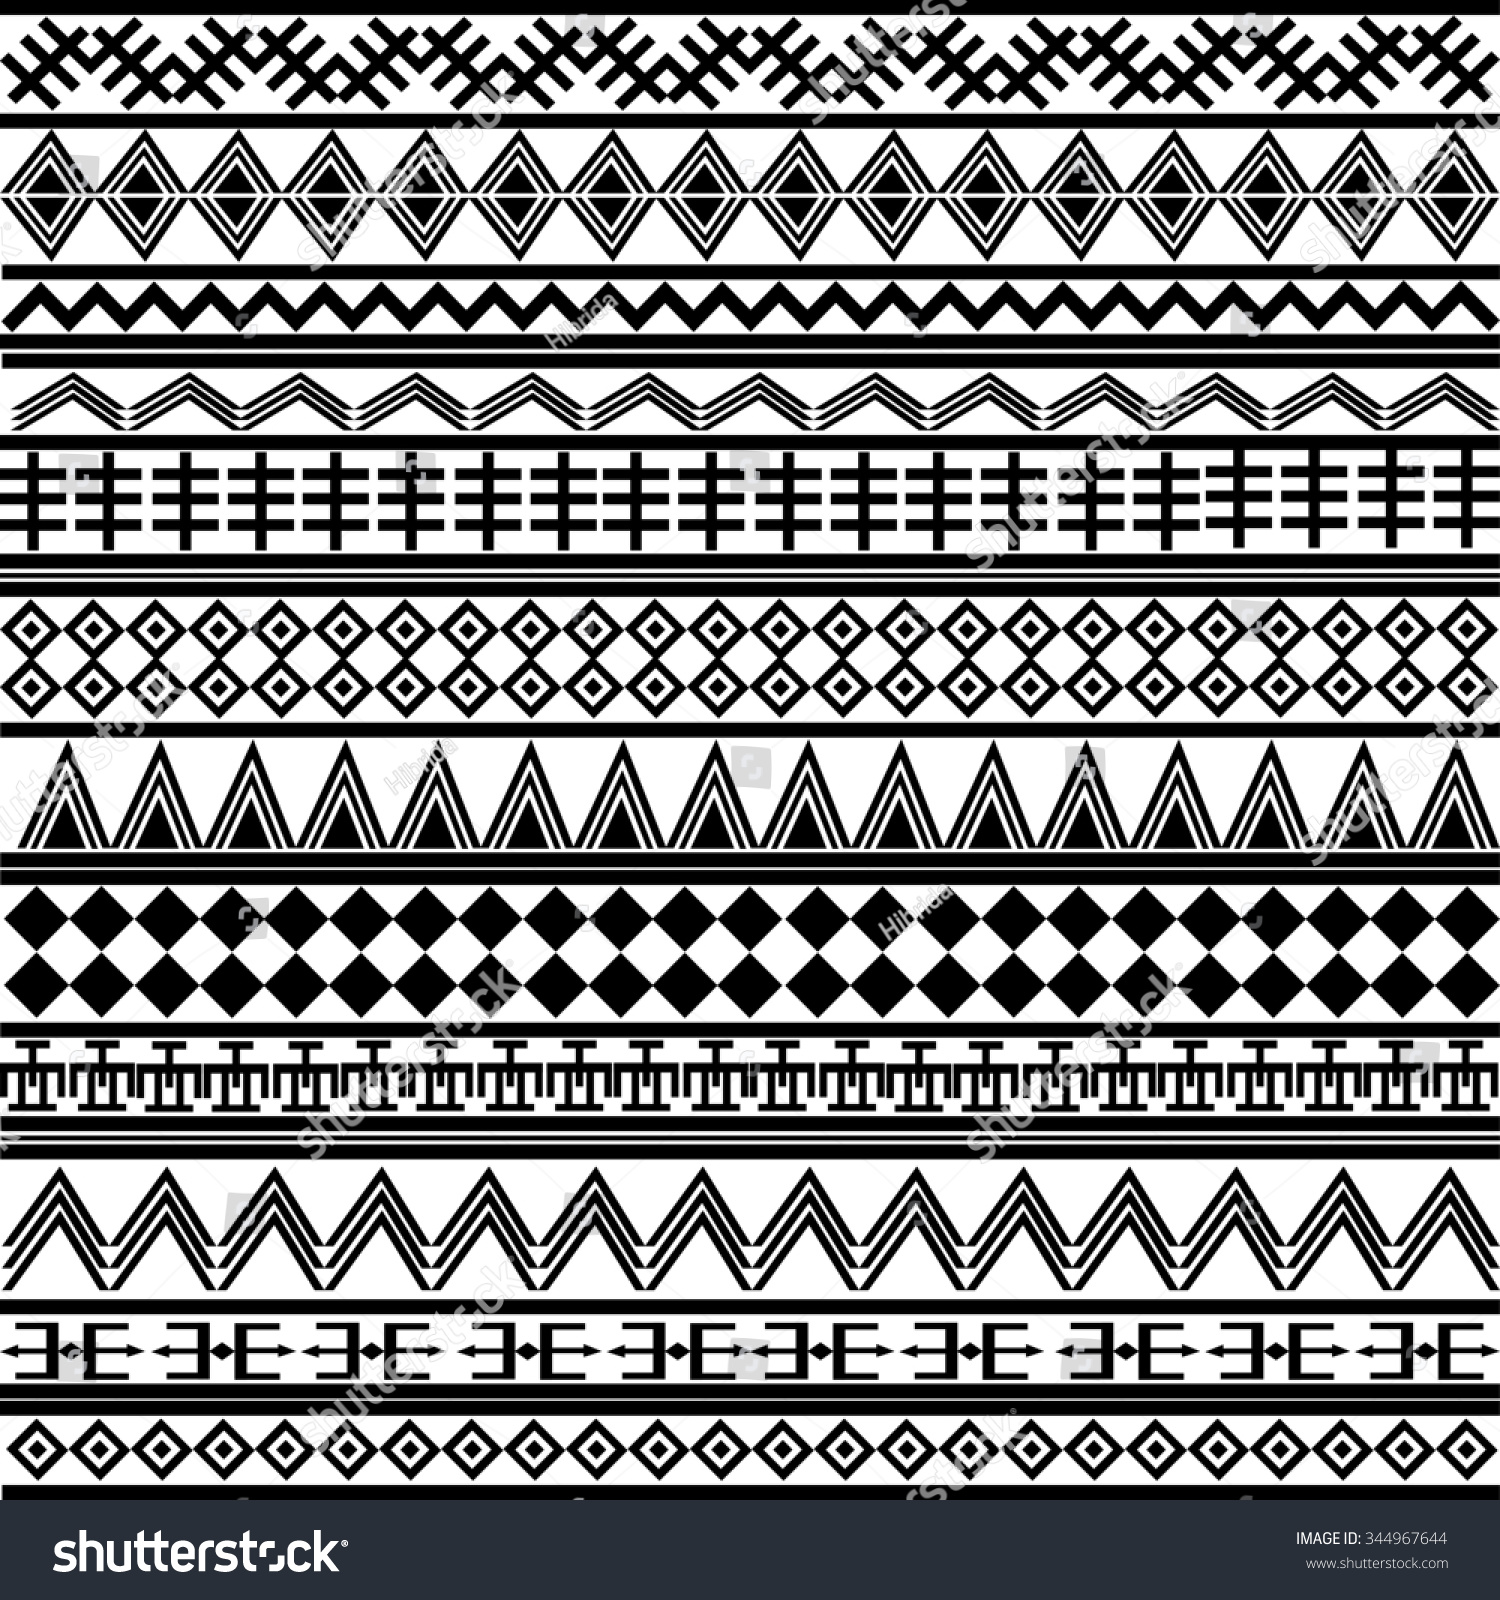 Texture With Ethnic Geometrical Ornaments, Black And White African ...